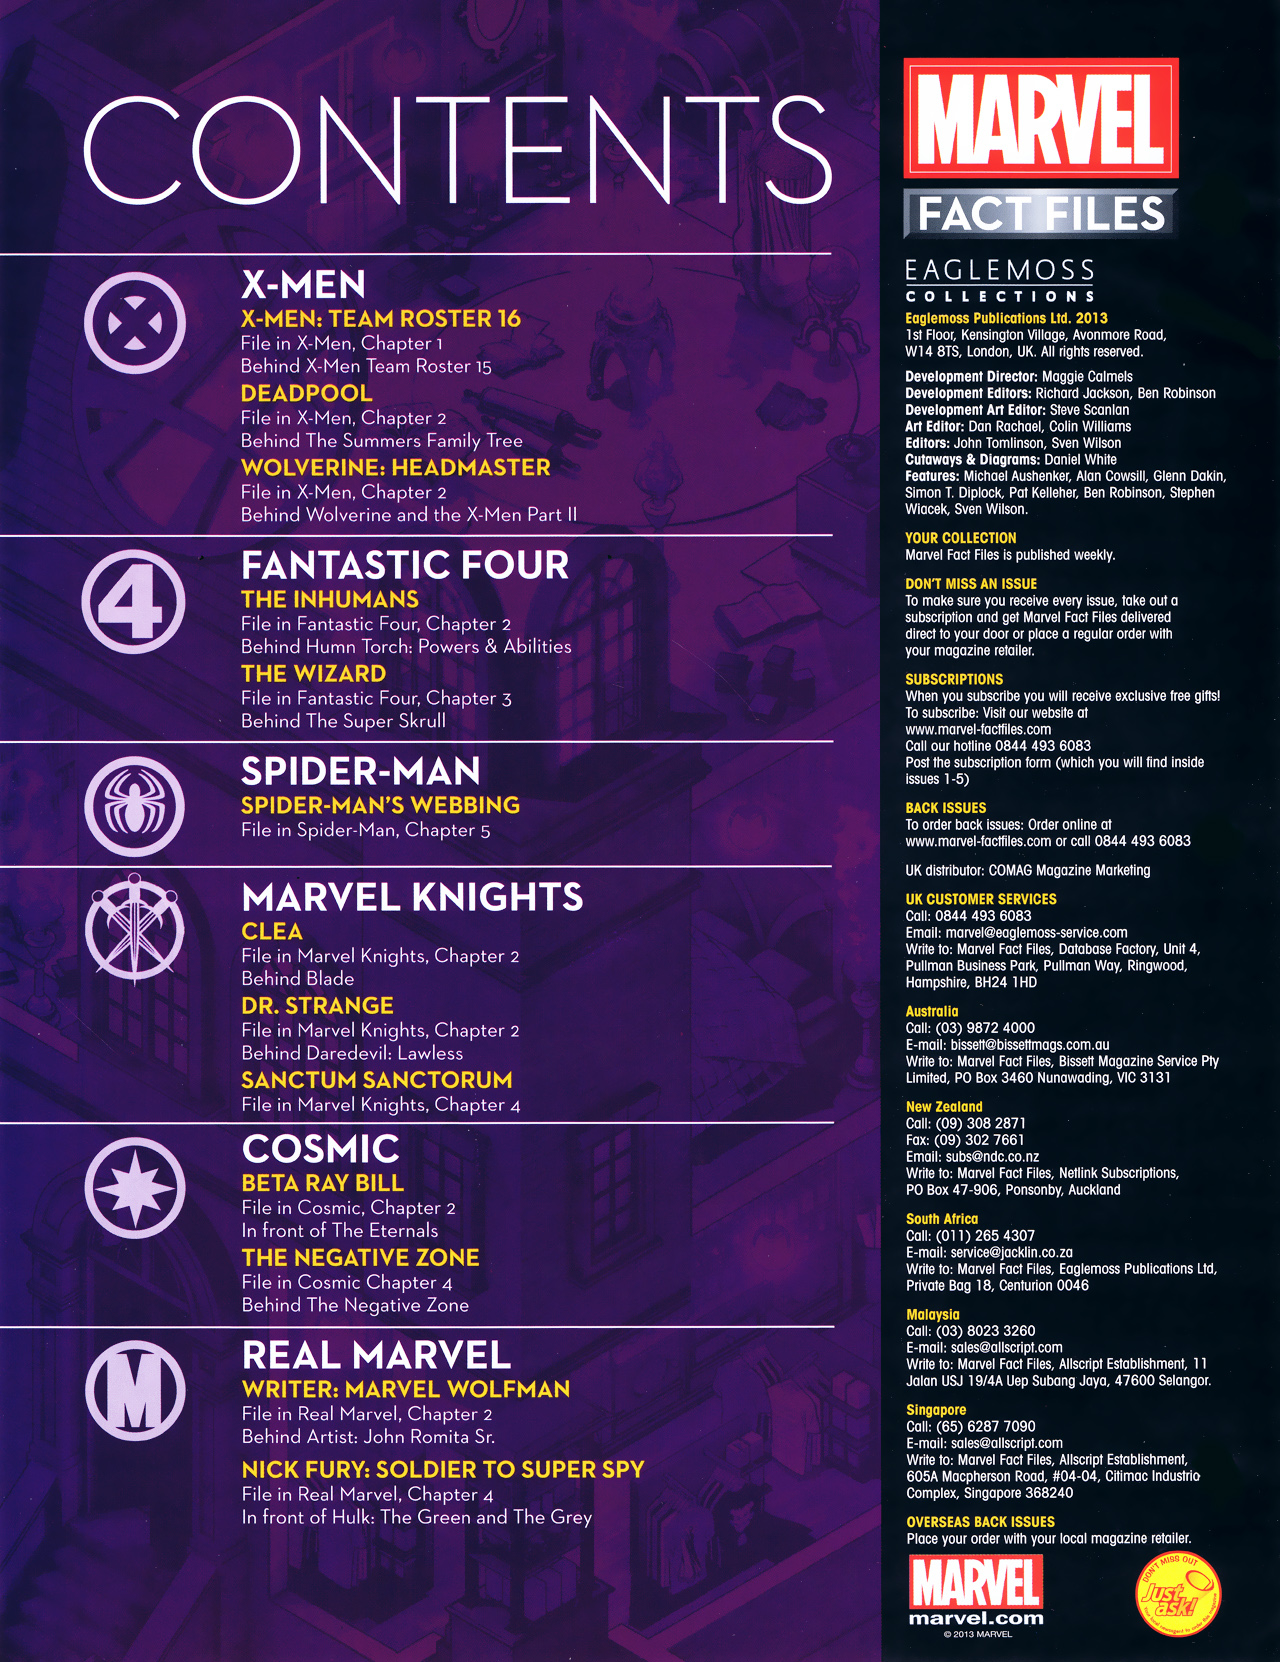 Read online Marvel Fact Files comic -  Issue #16 - 3